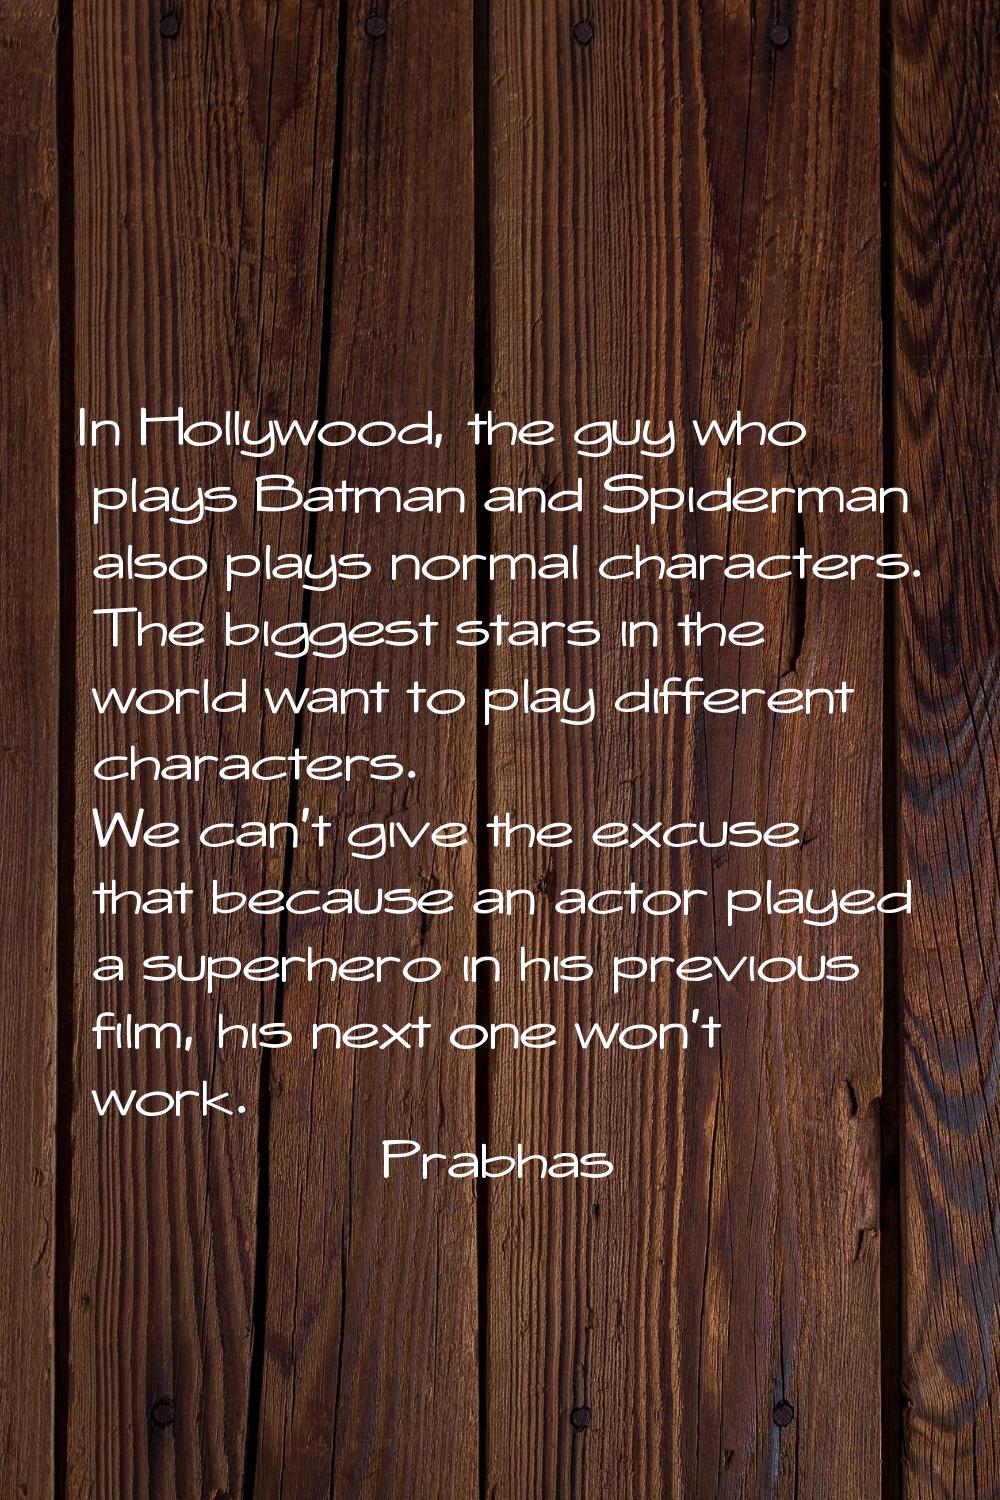 In Hollywood, the guy who plays Batman and Spiderman also plays normal characters. The biggest star